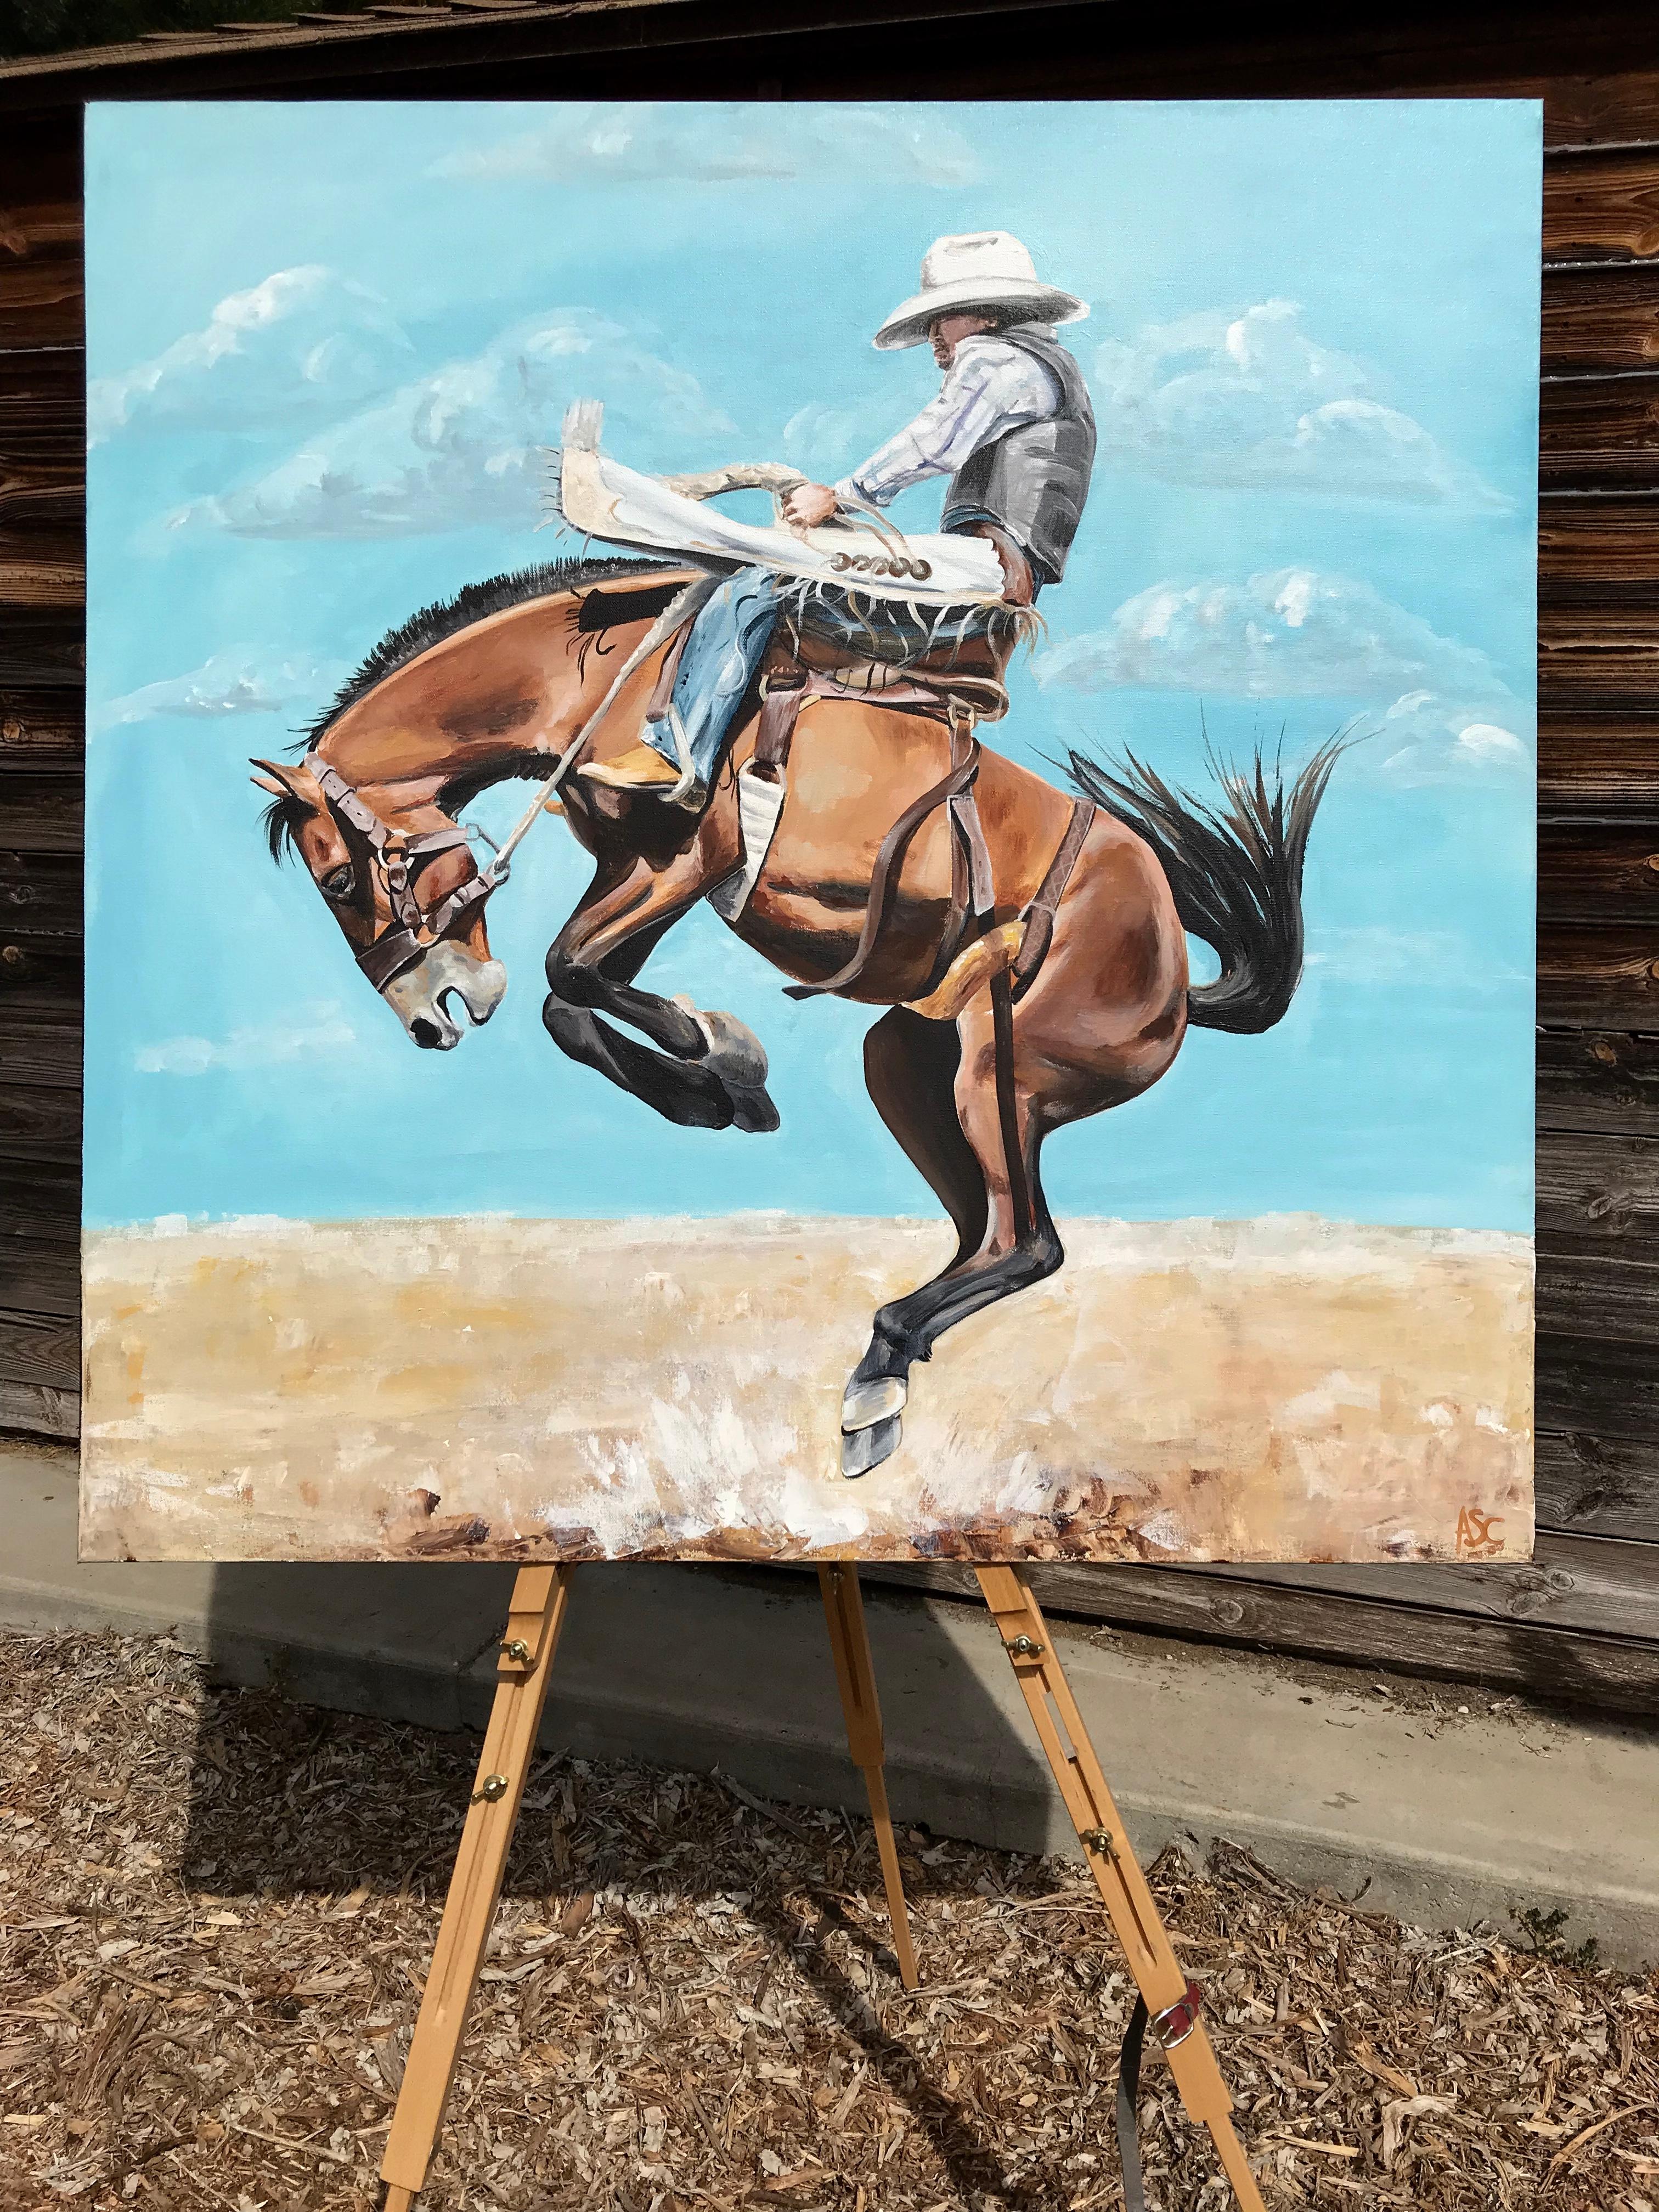 <p>Artist Comments<br />A bucking bronco rears up, his rider unfazed. A bright blue sky and minimal landscape detail accentuate the energy of the scene. Alana describes the painting as 